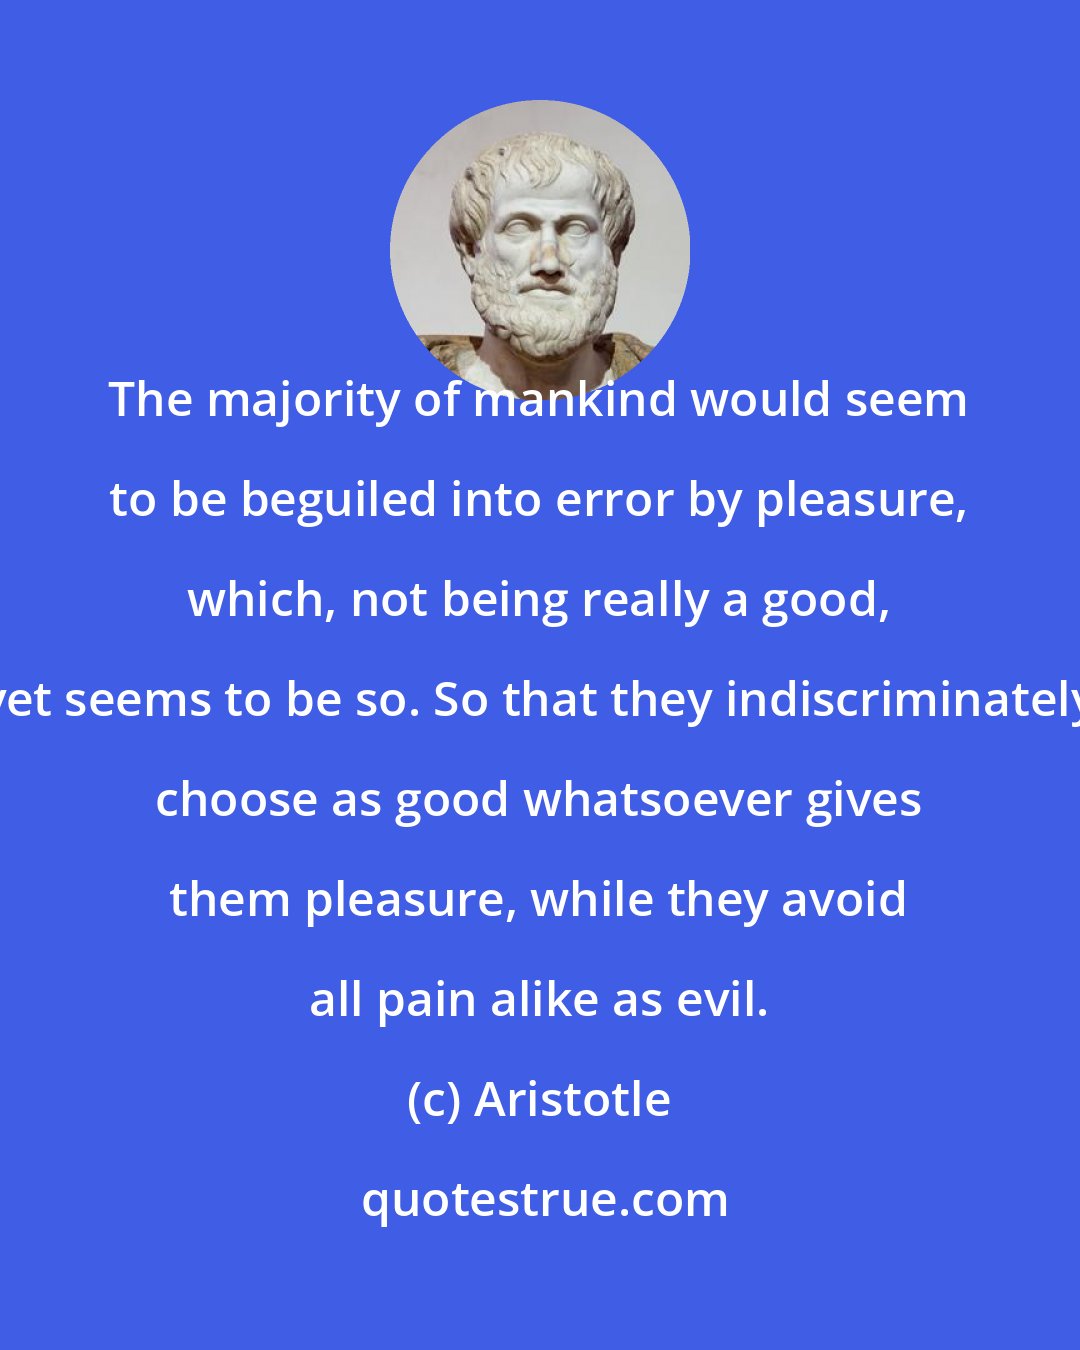 Aristotle: The majority of mankind would seem to be beguiled into error by pleasure, which, not being really a good, yet seems to be so. So that they indiscriminately choose as good whatsoever gives them pleasure, while they avoid all pain alike as evil.